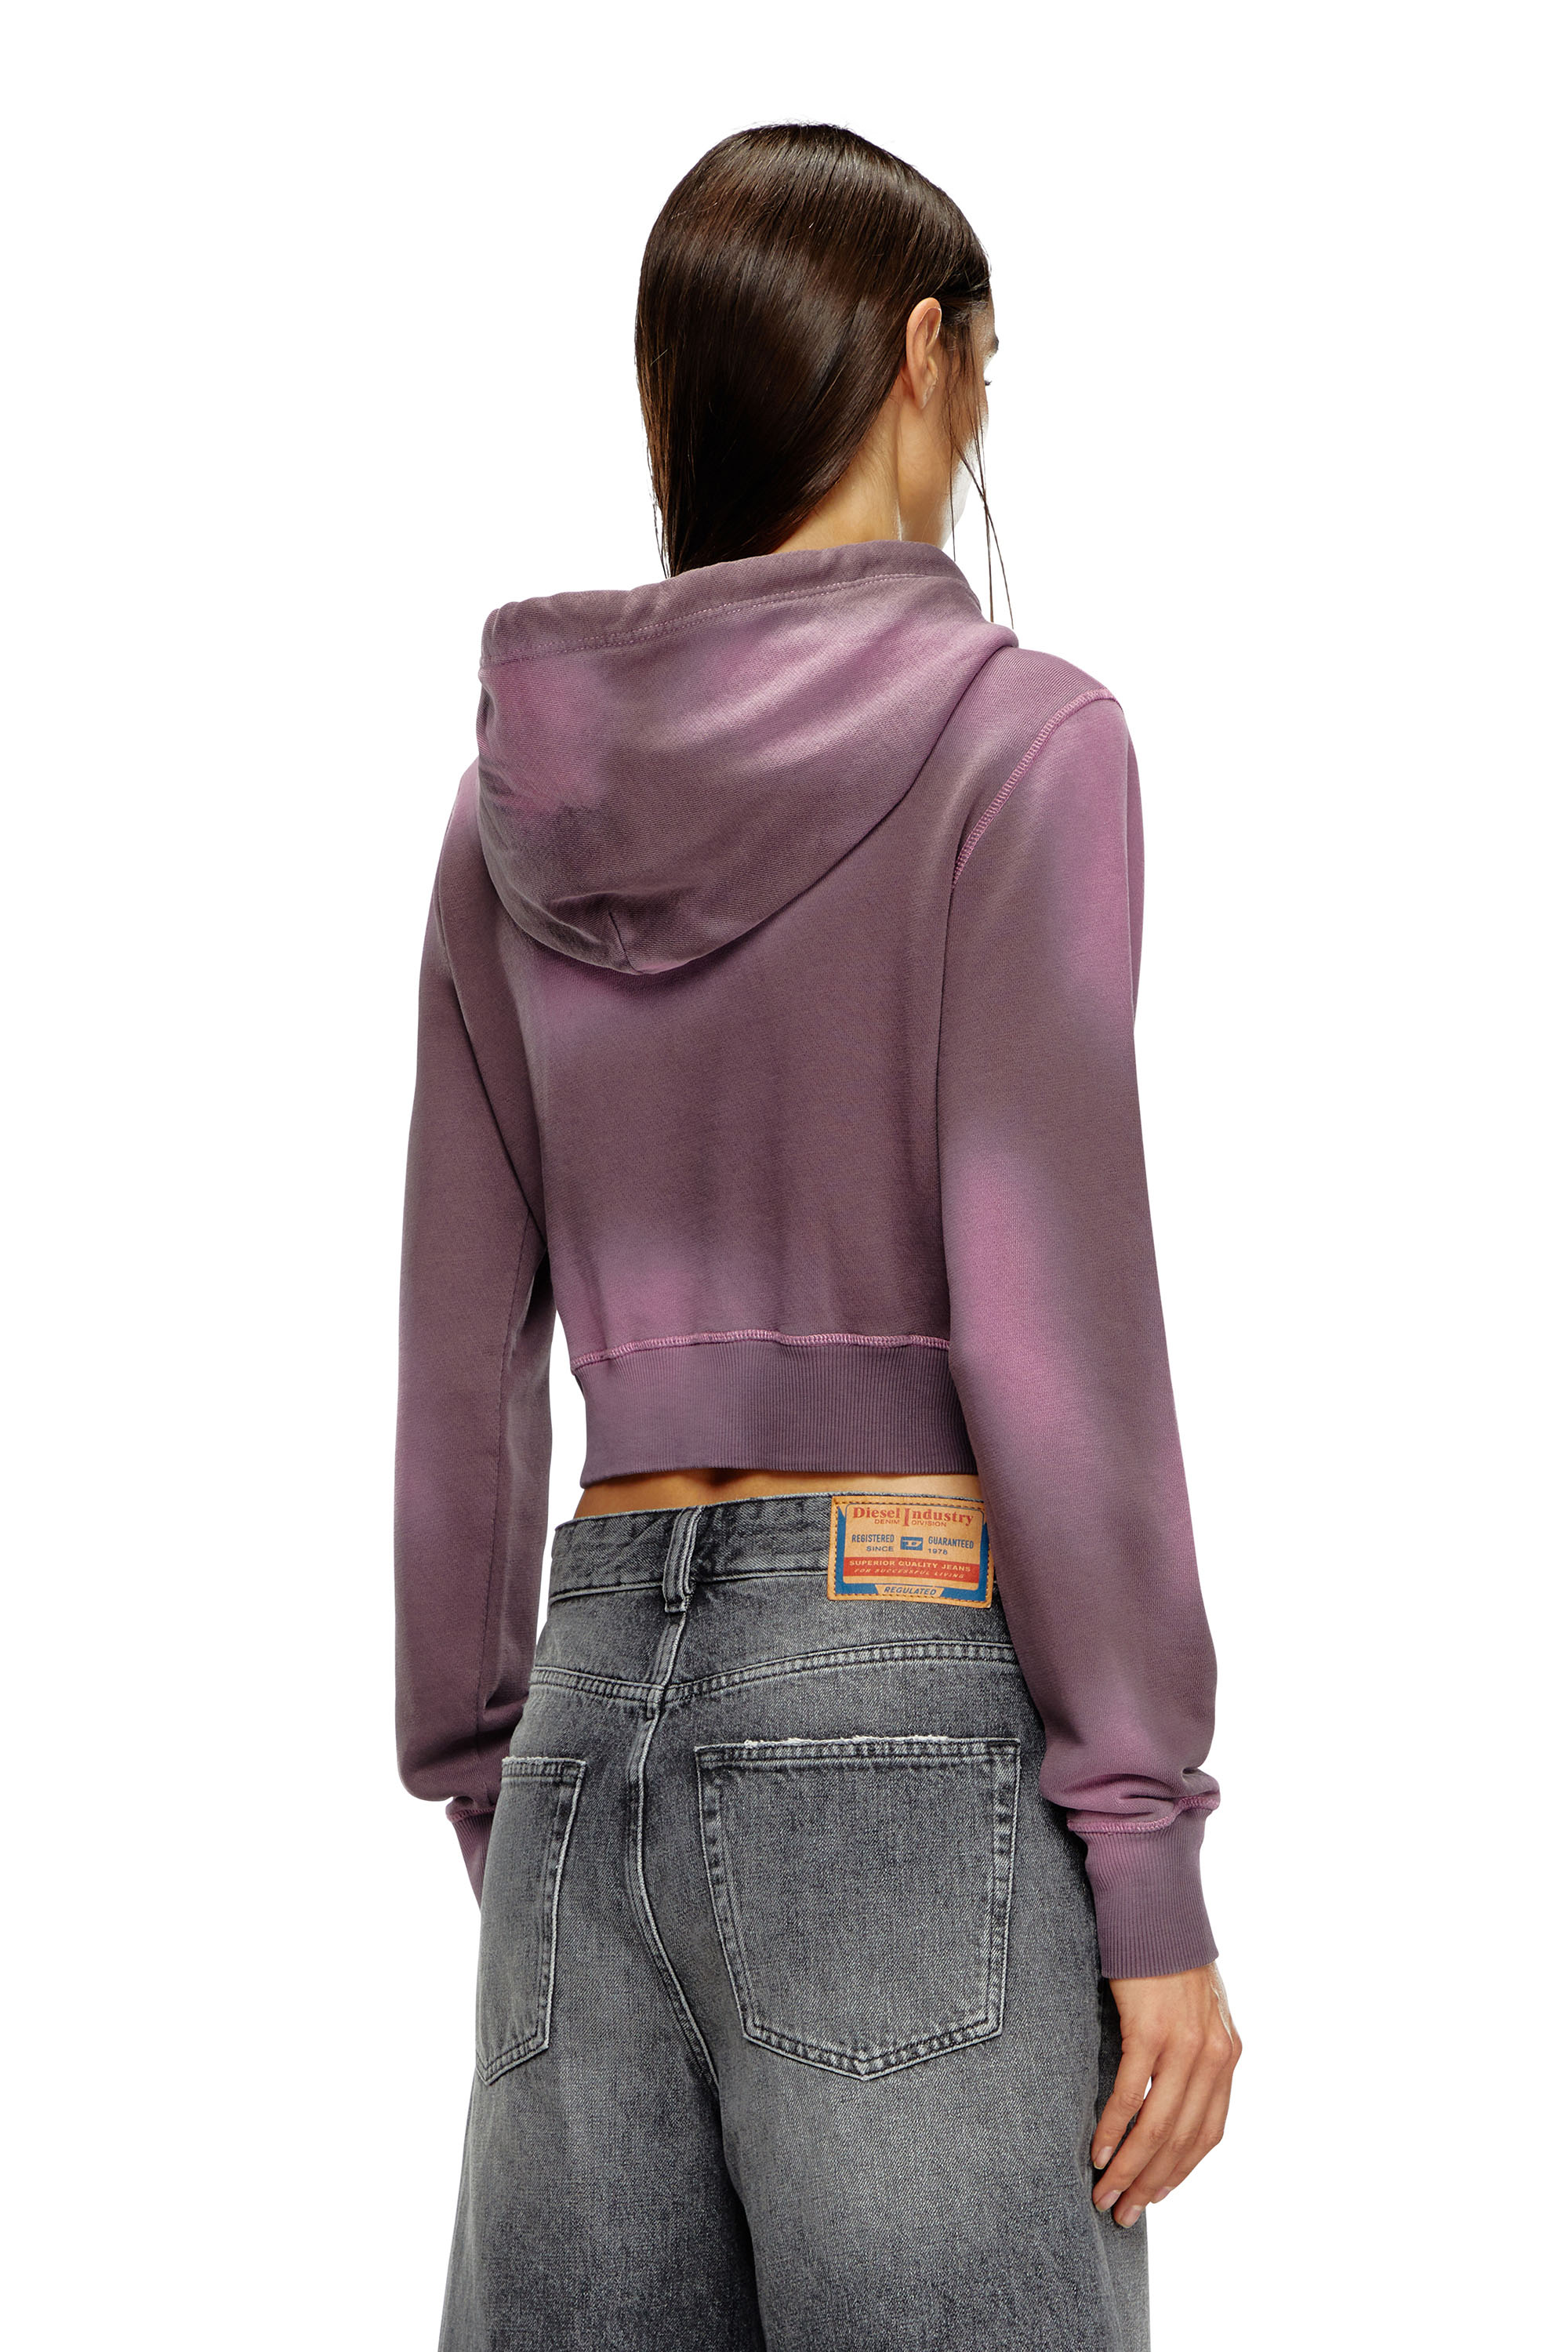 Diesel - F-SLIMMY-HOOD-P1, Woman Overdyed hoodie with frayed logo in Violet - Image 4